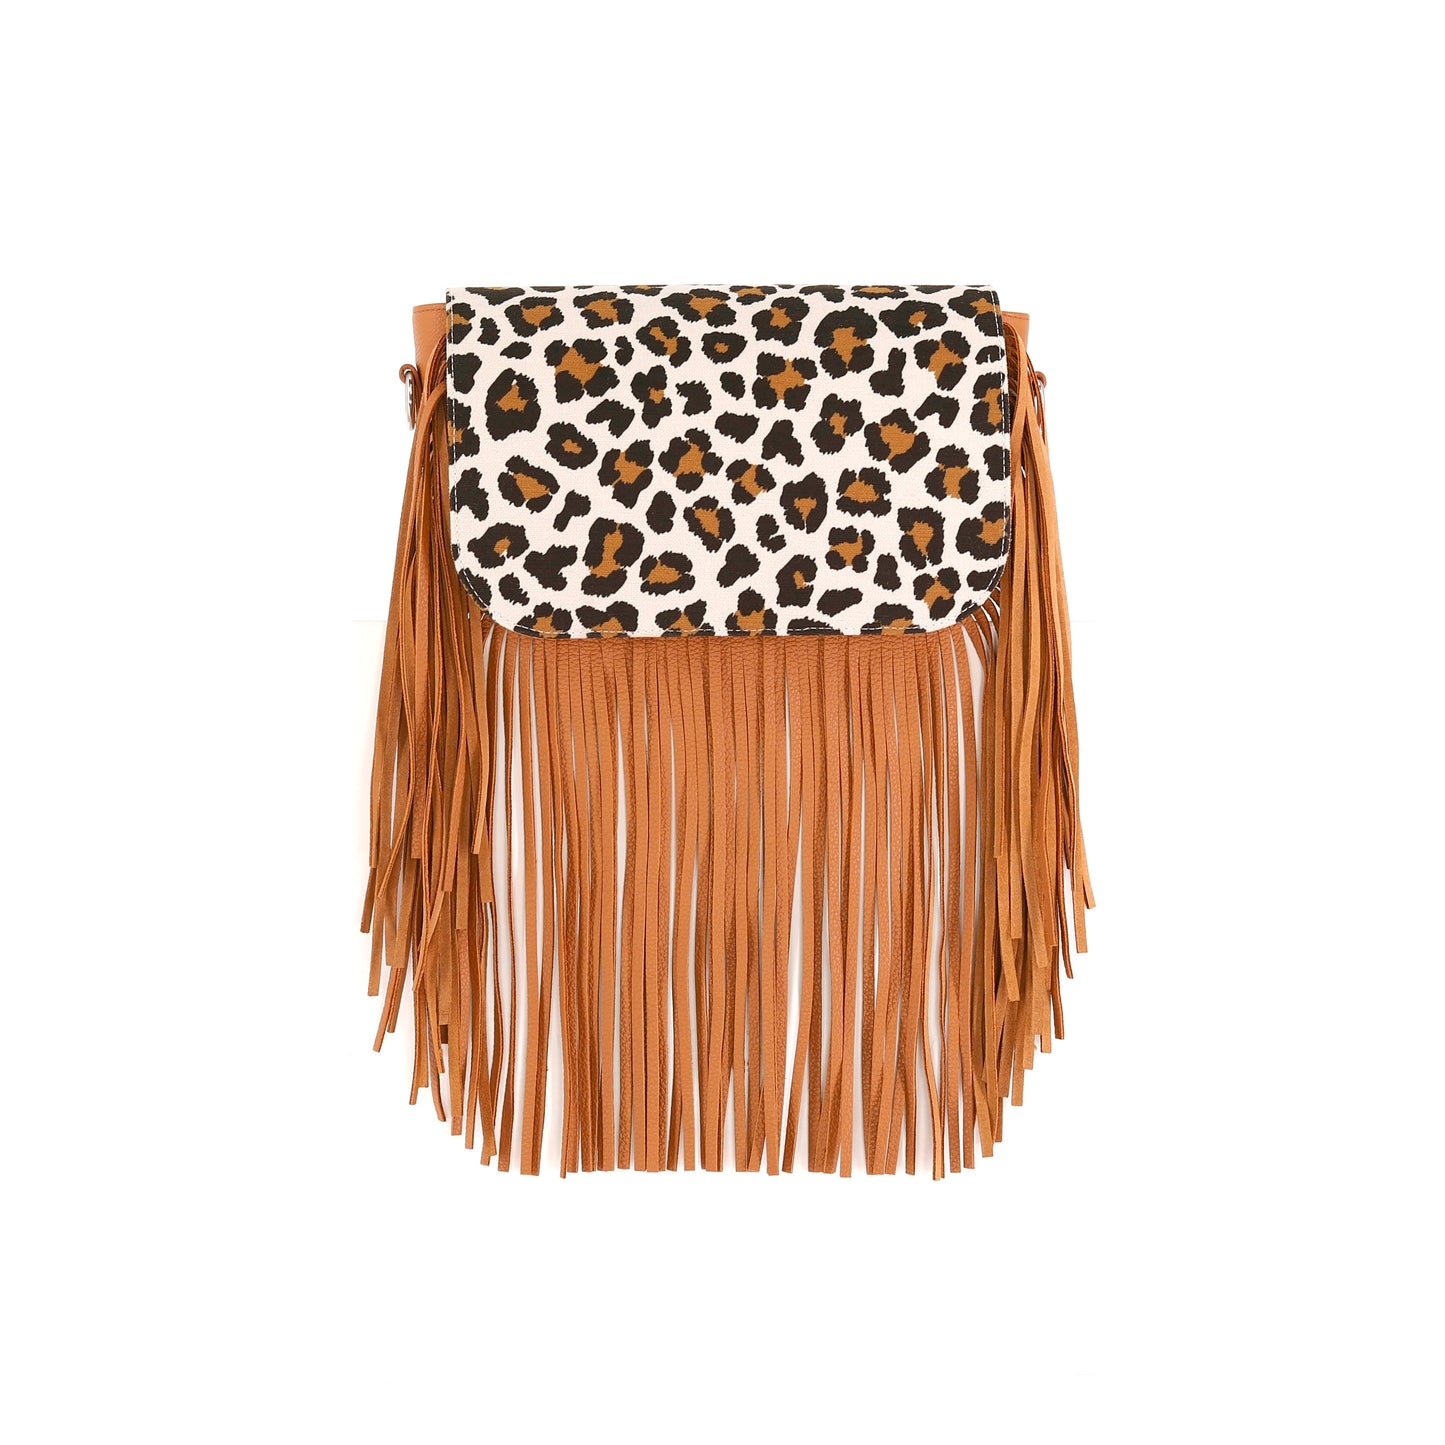 LEOPARD flap off-white caramel small